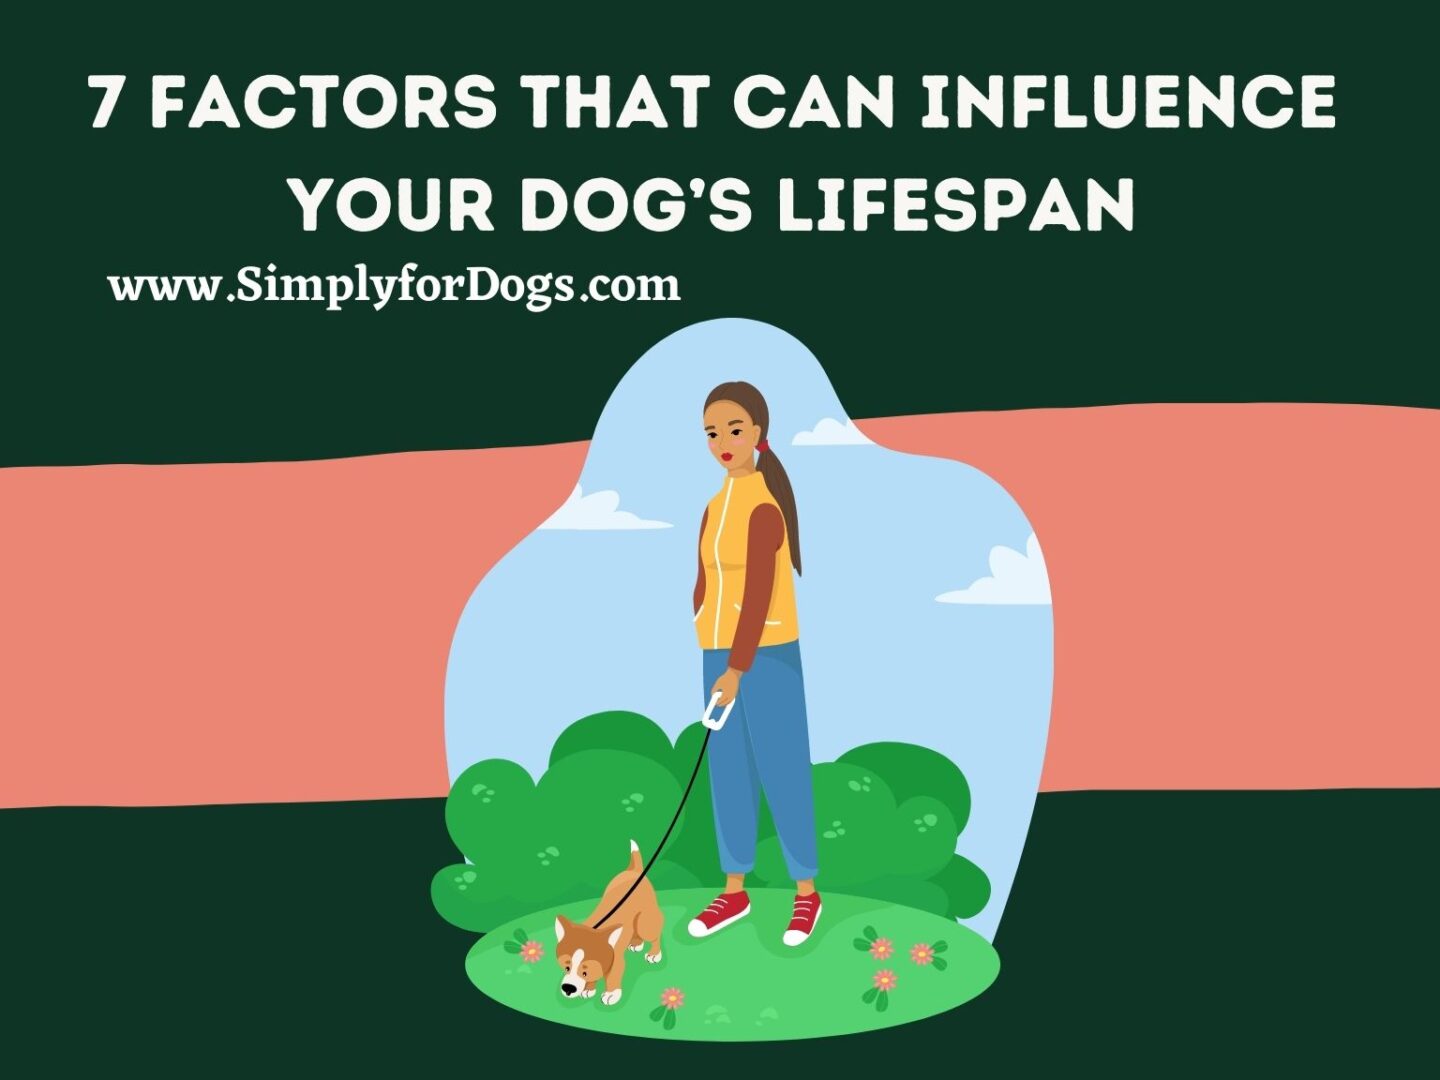 7 Factors That Can Influence Your Dog’s Lifespan